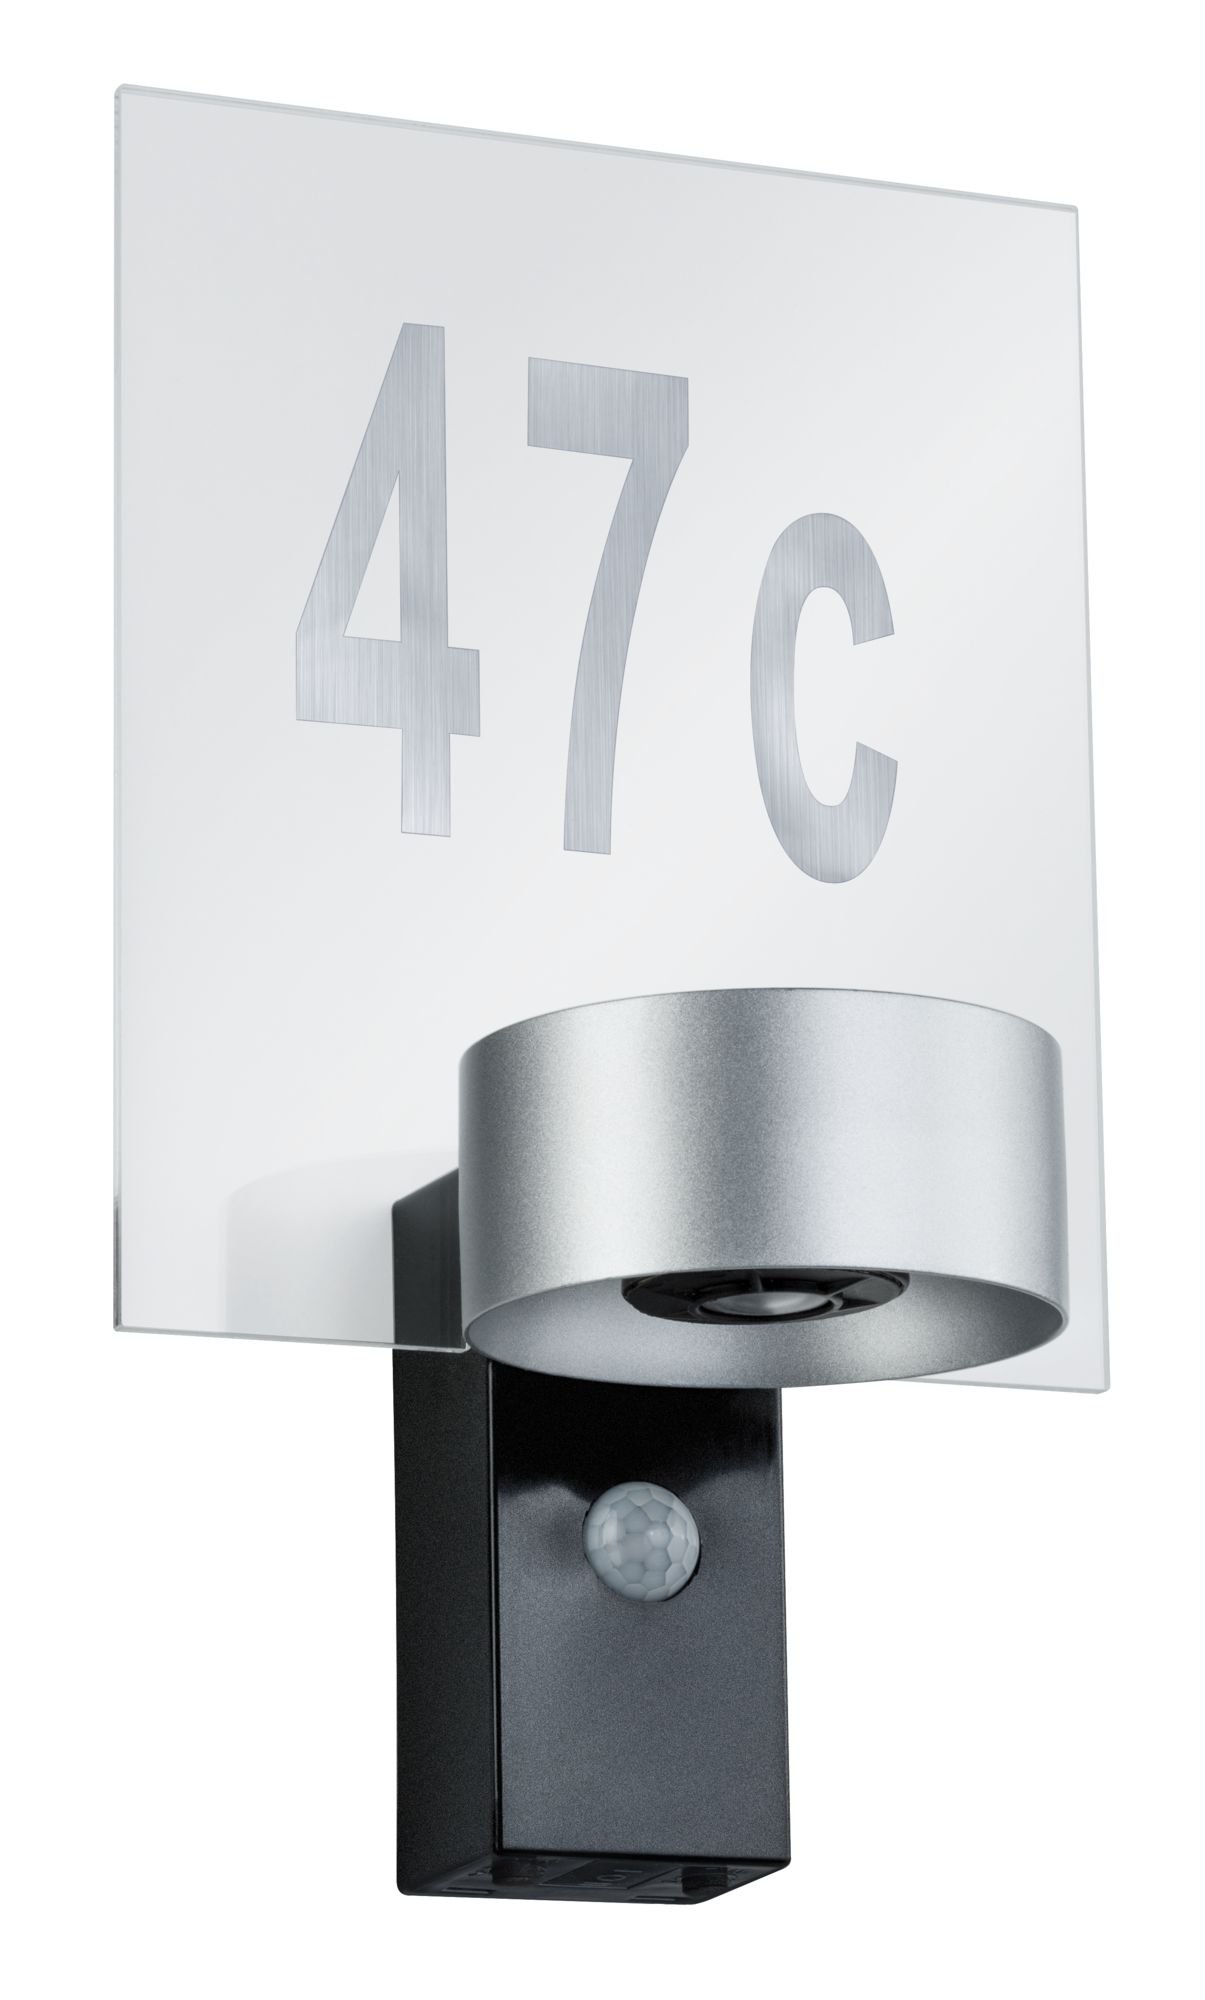 House wall luminaire Cone IP44 3,000 K 8 W Silver/ Anthracite with motion sensor.